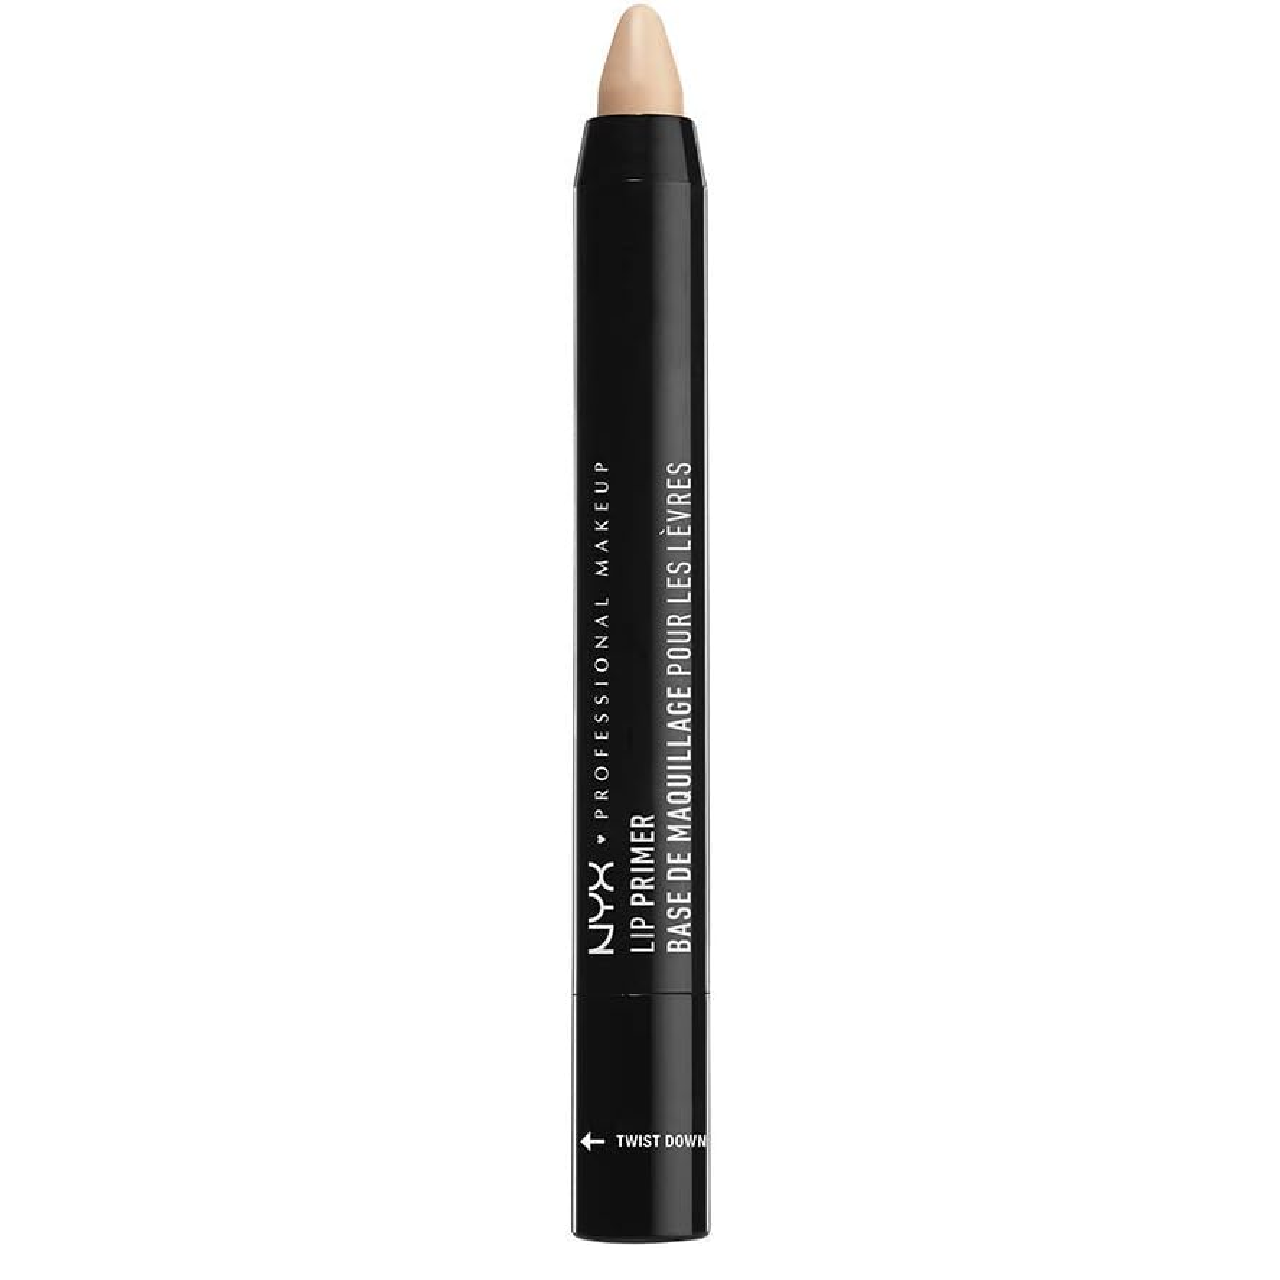 NYX Professional Makeup Lip Primer tube displayed on a white background